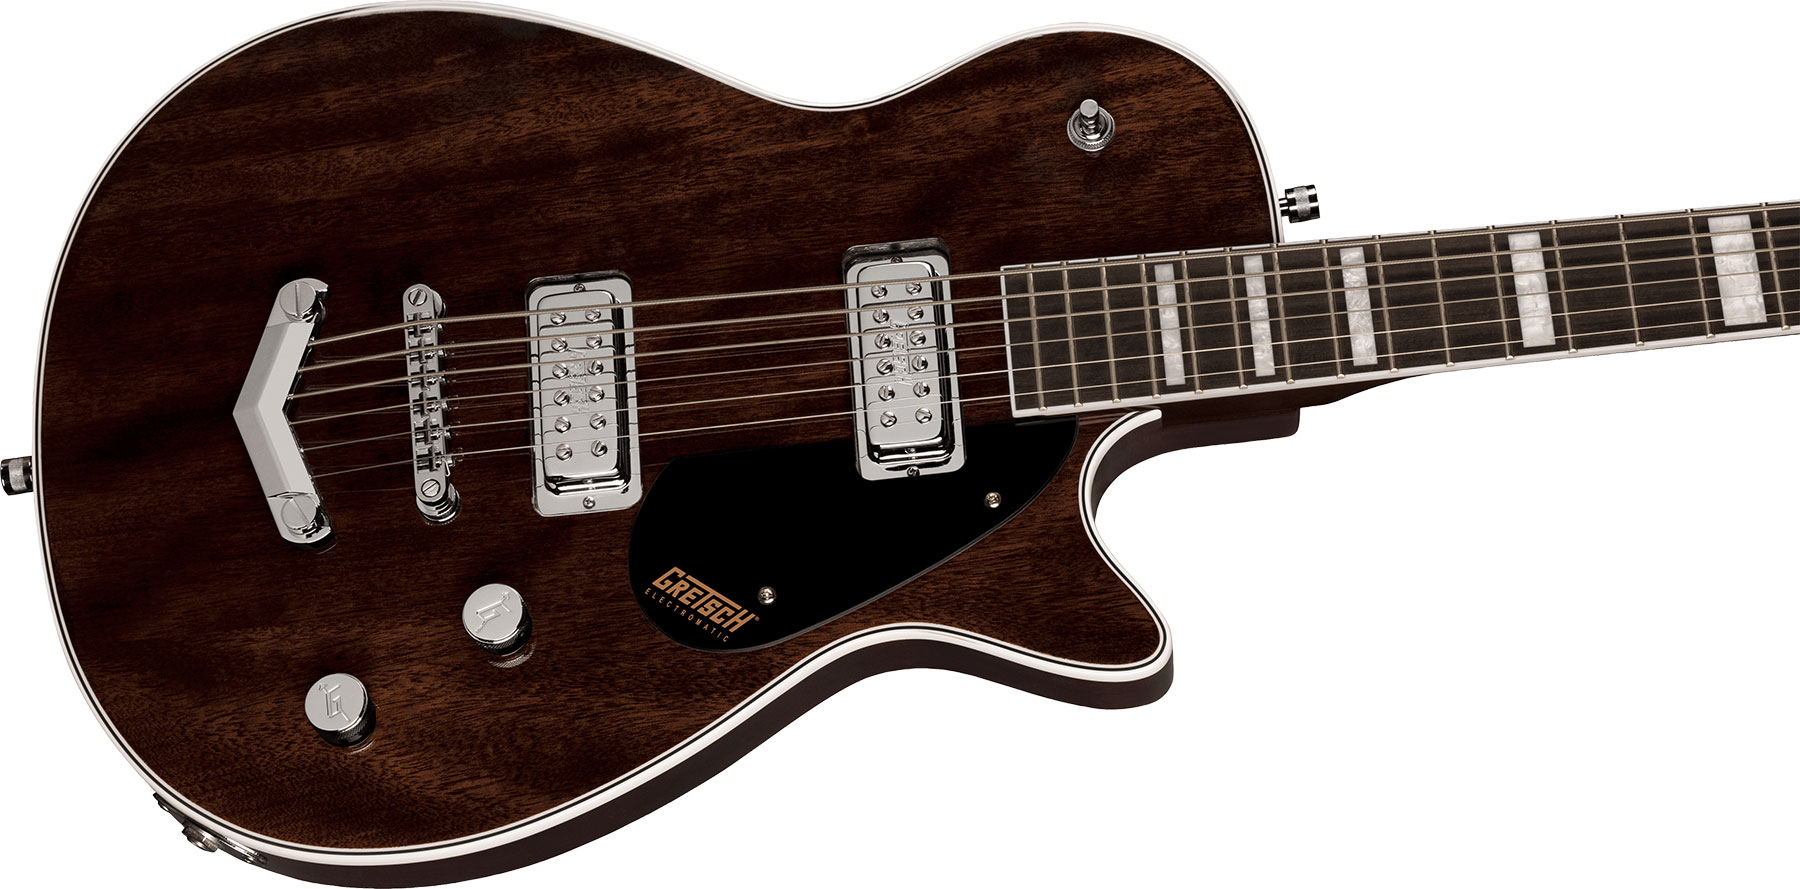 Gretsch G5260 Electromatic Jet Baritone V-stoptail 2h Ht Lau - Imperial Stain - Baritone guitar - Variation 2